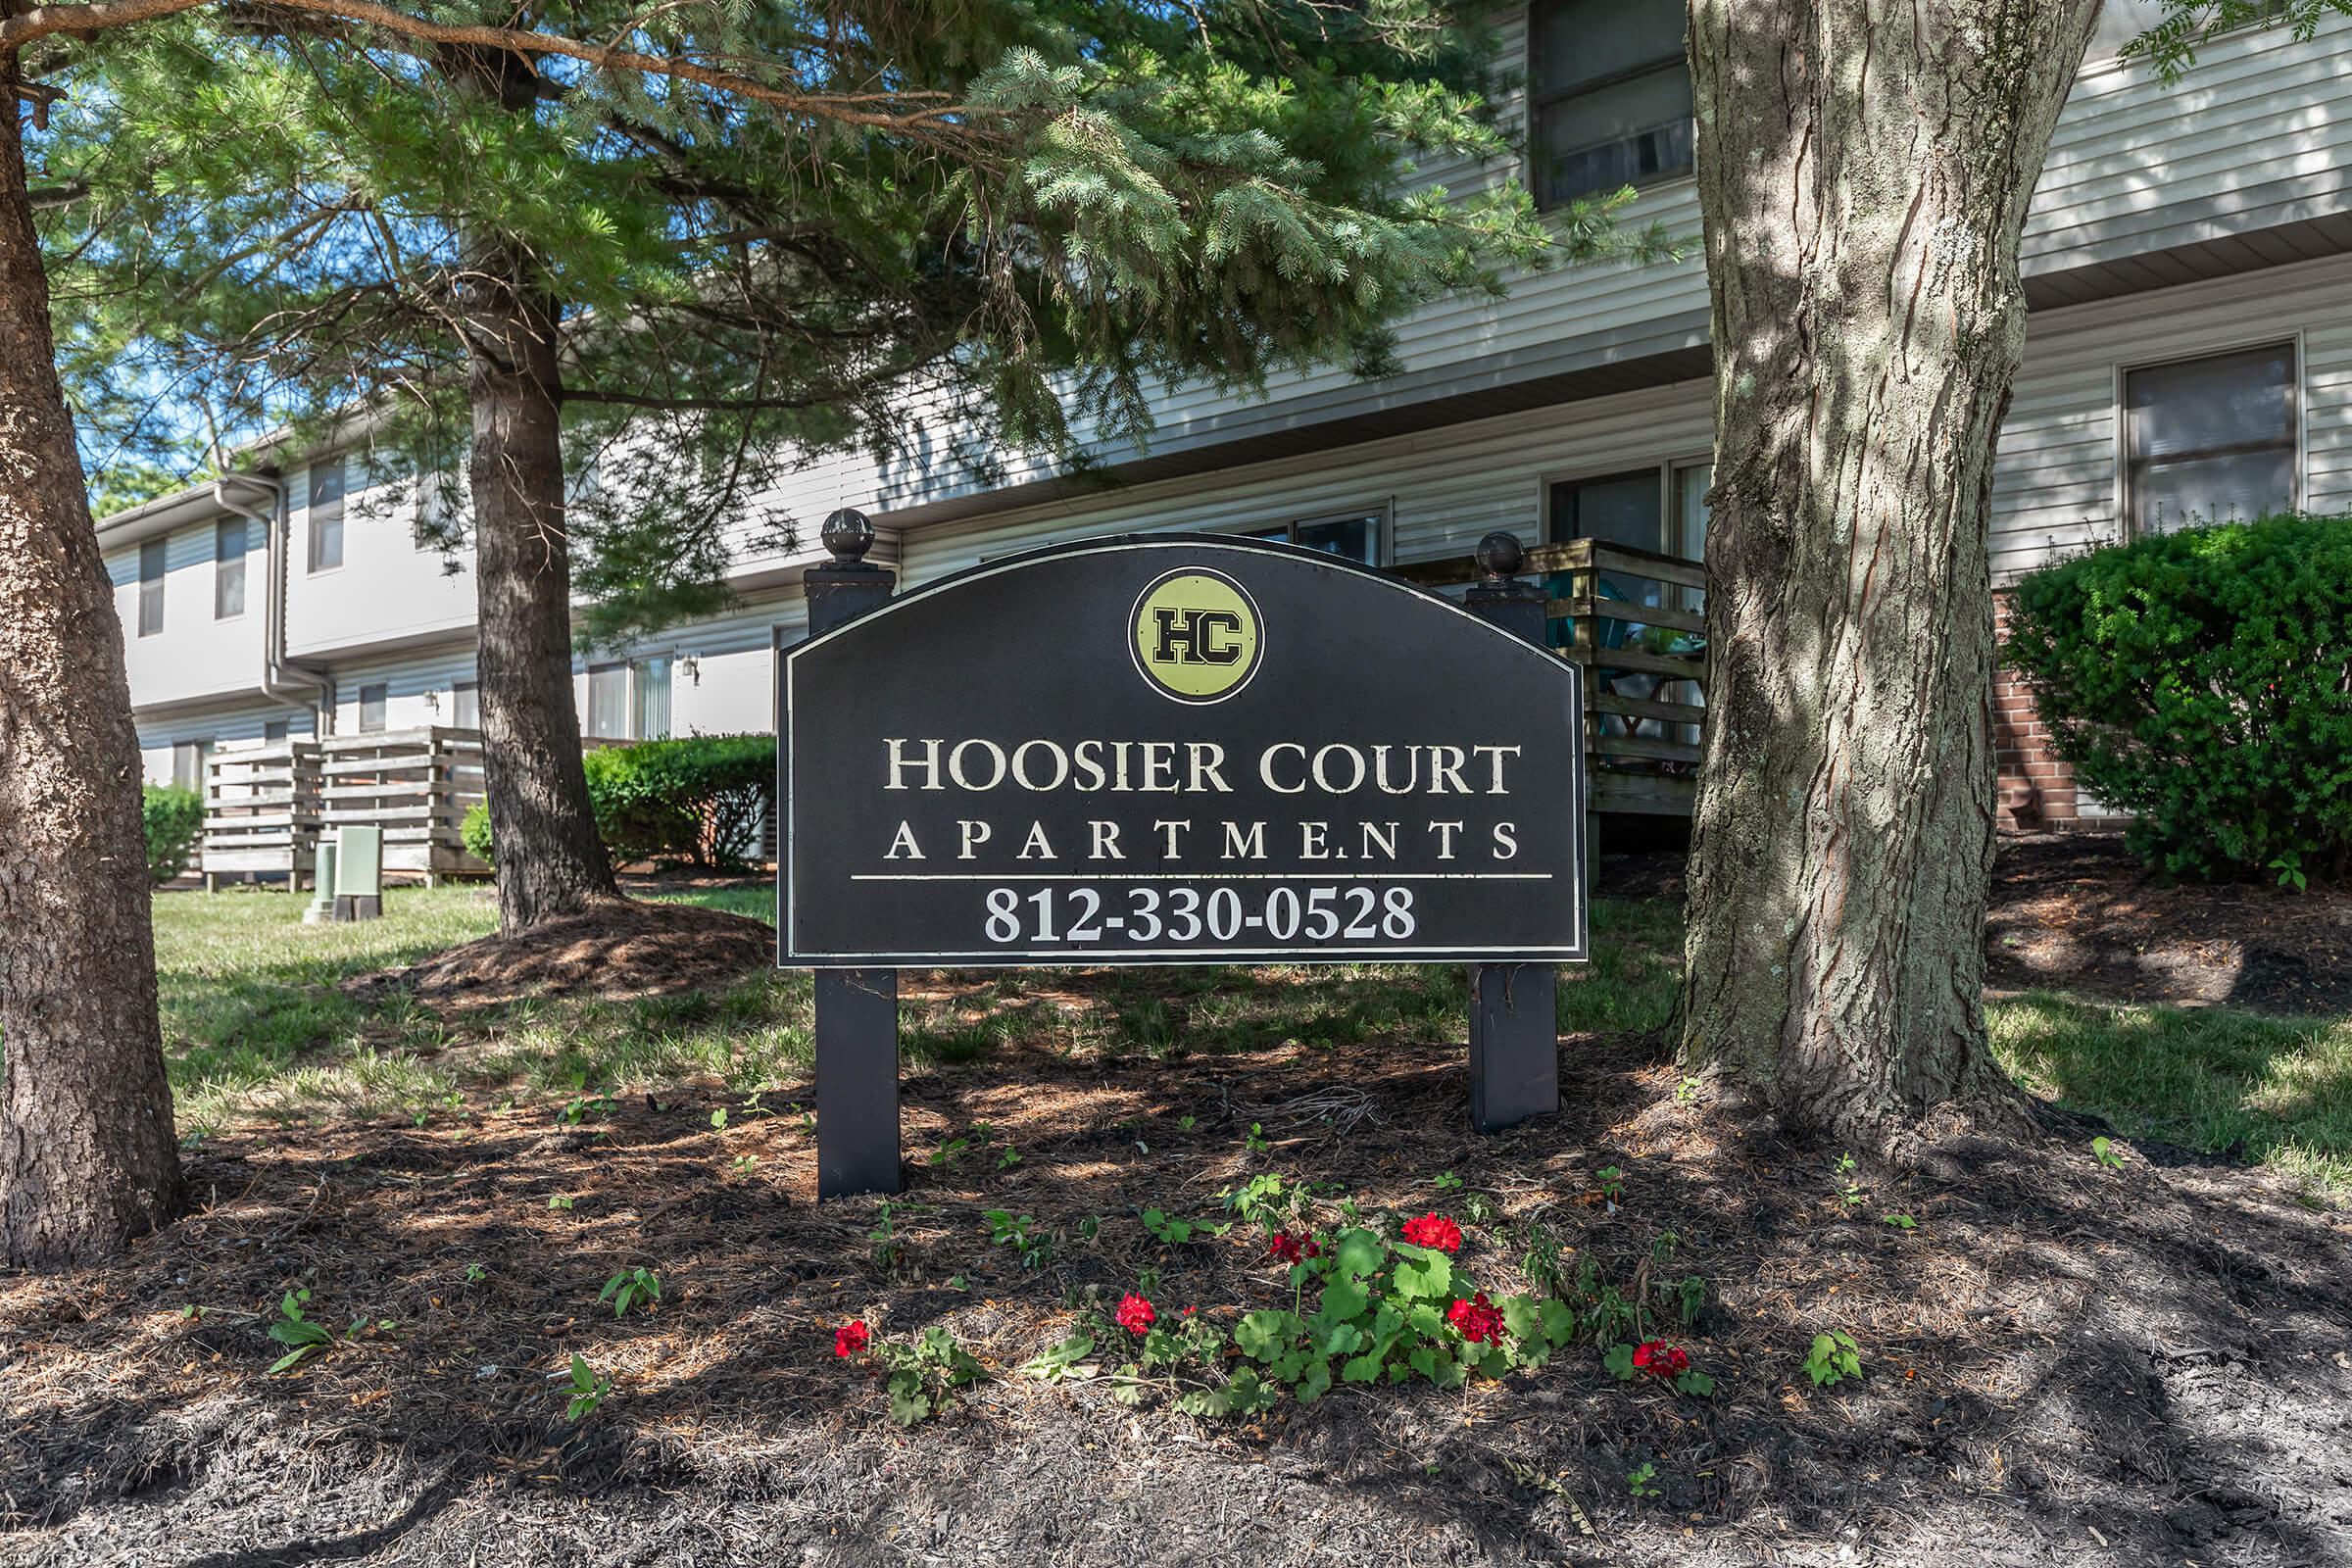 WE HOPE TO SEE YOU SOON AT HOOSIER COURT APARTMENTS